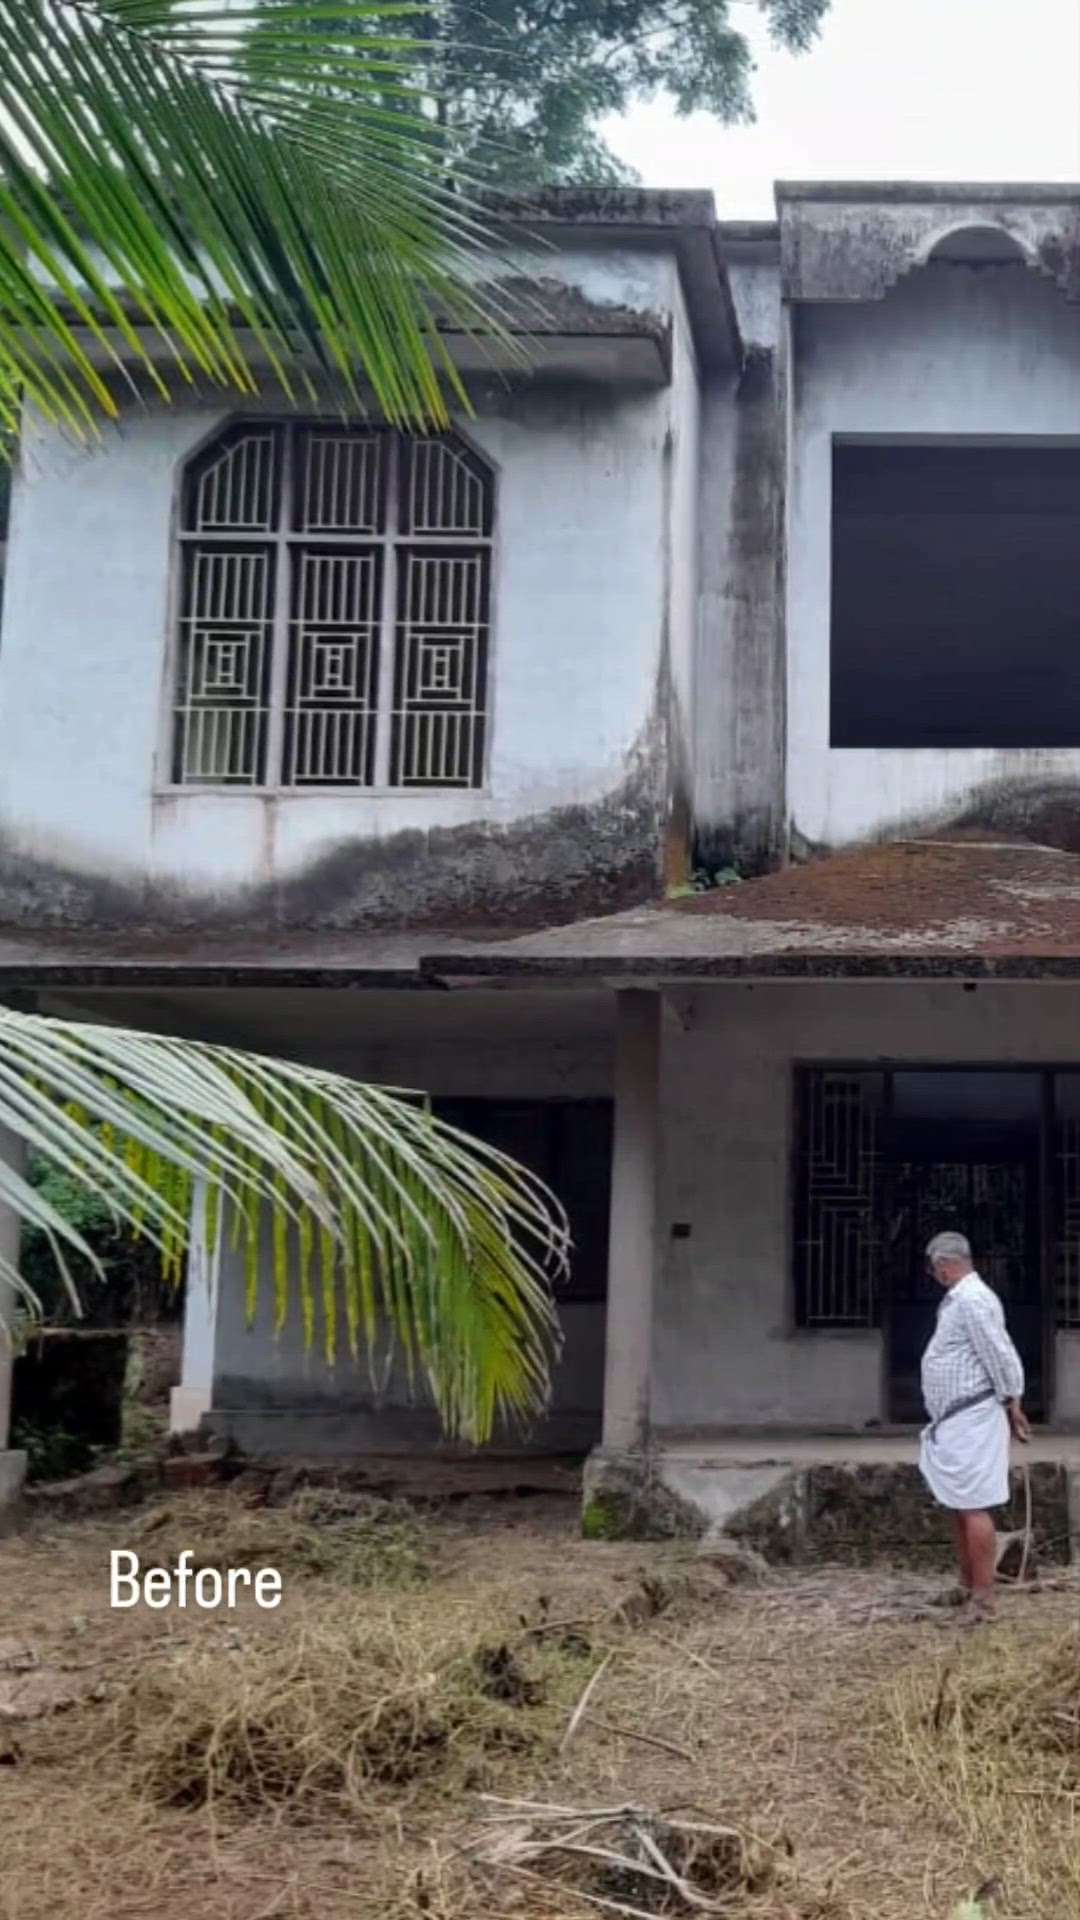 Before 🤍 After

Category: Residence Renovation 
Location: Mele Chovva,Kannur
Area : 2300 sqft
Status: Completed
.
.
.
.
.
.
.
.
.
#residence #house #home #tropicalhouse #before&after #courtyard #staircase #home #keralahomes #budgethome #tropicalarchitecture #. #landscapedesign #insideoutside #spaces #instahomes  #keralahomes #architecture #homedecor #interiordesign #house #indoorplants #greenhome #decor #artificialgrass 
#beforeandafter #HouseRenovation #morderngousedesign #Kannur #archkerala #kerala_architecture #architecturedesigns